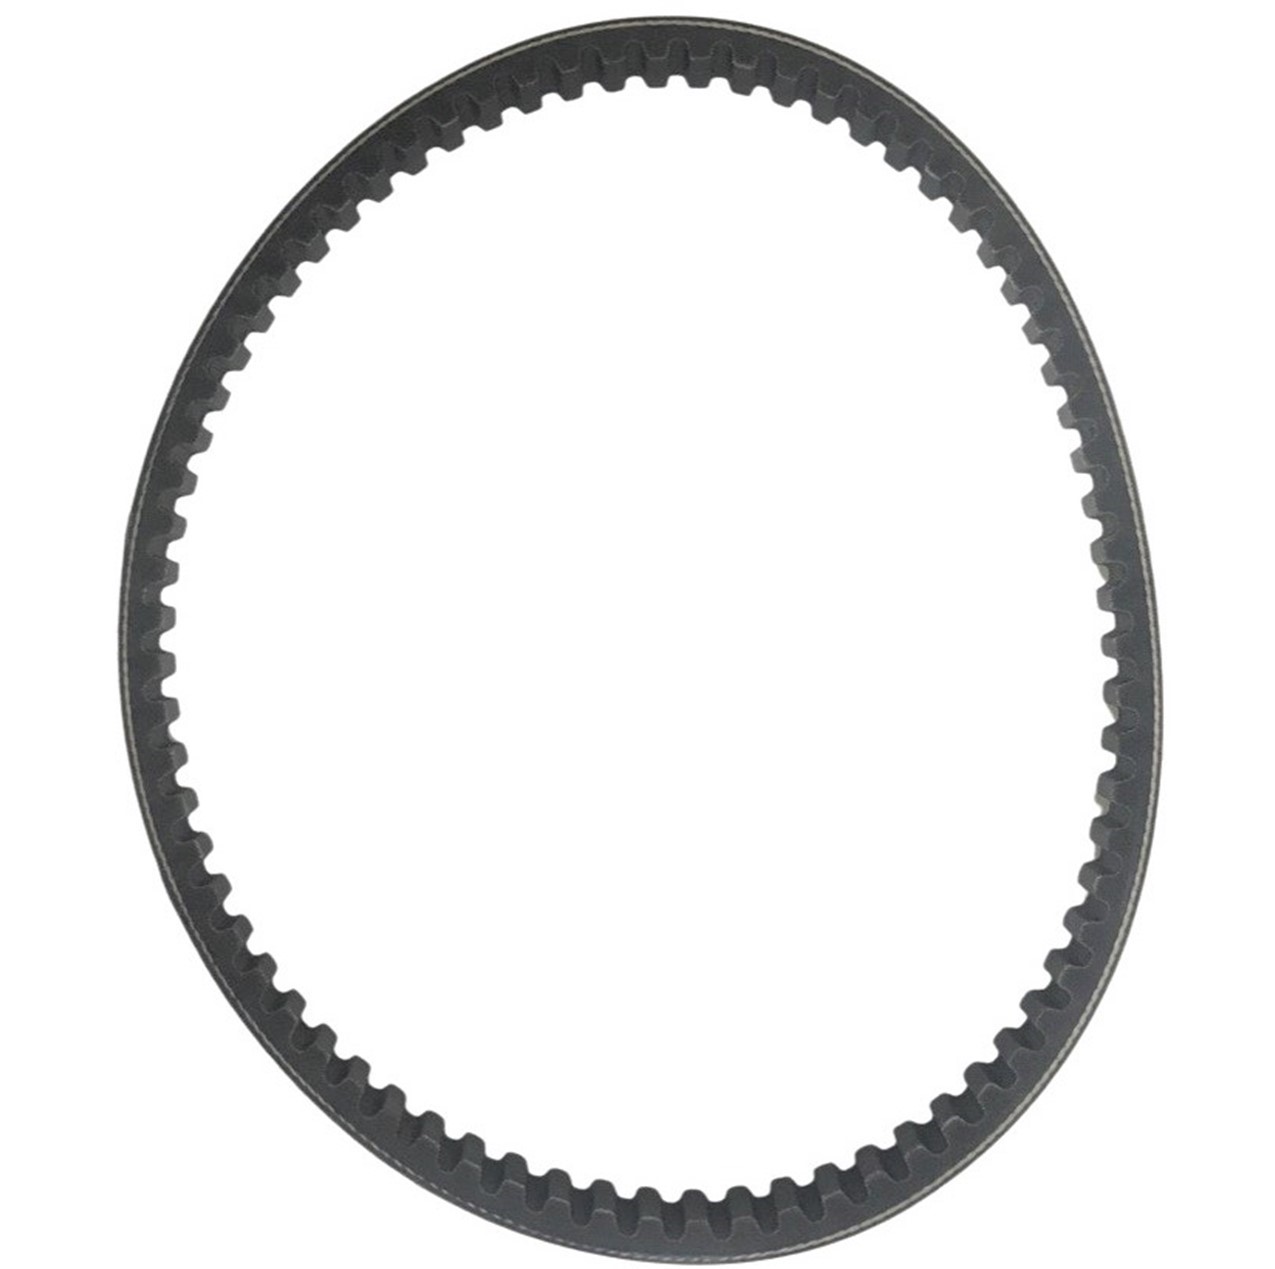 Belt 775x18x30 Fits Many Sym & Peugeot 50cc scooters + More. See attached list.